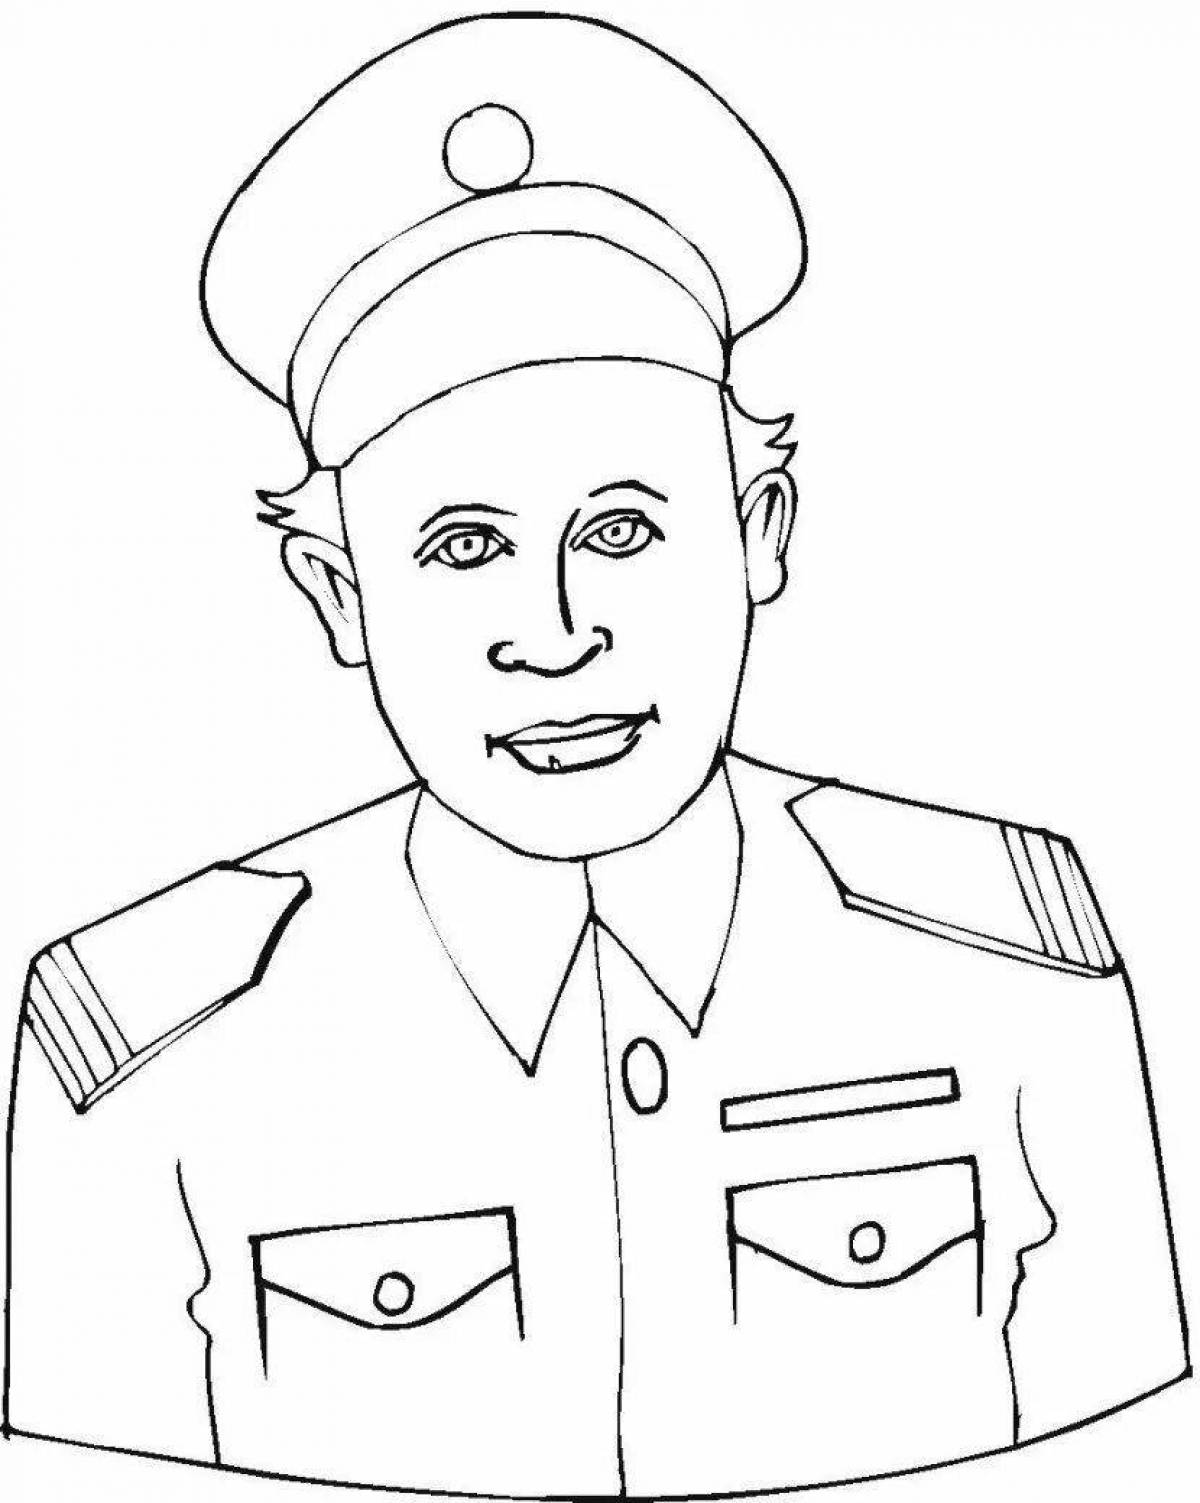 Adorable soldier face coloring page for kids